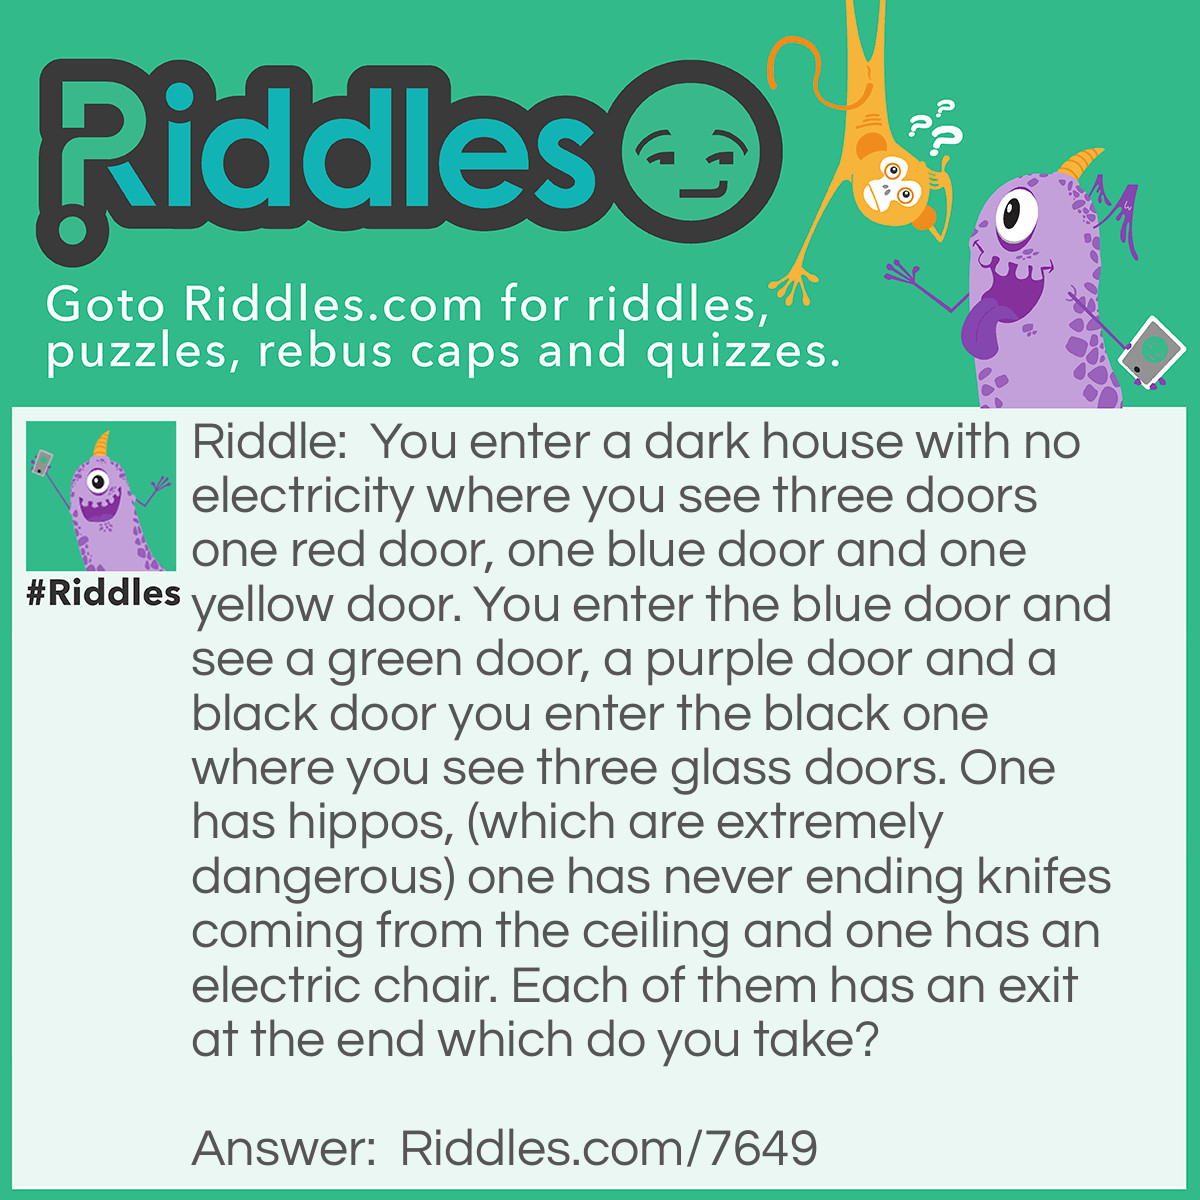 Riddle: You enter a dark house with no electricity where you see three doors one red door, one blue door and one yellow door. You enter the blue door and see a green door, a purple door and a black door you enter the black one where you see three glass doors. One has hippos, (which are extremely dangerous) one has never ending knifes coming from the ceiling and one has an electric chair. Each of them has an exit at the end which do you take? Answer: No electricity! Take the electric chair!